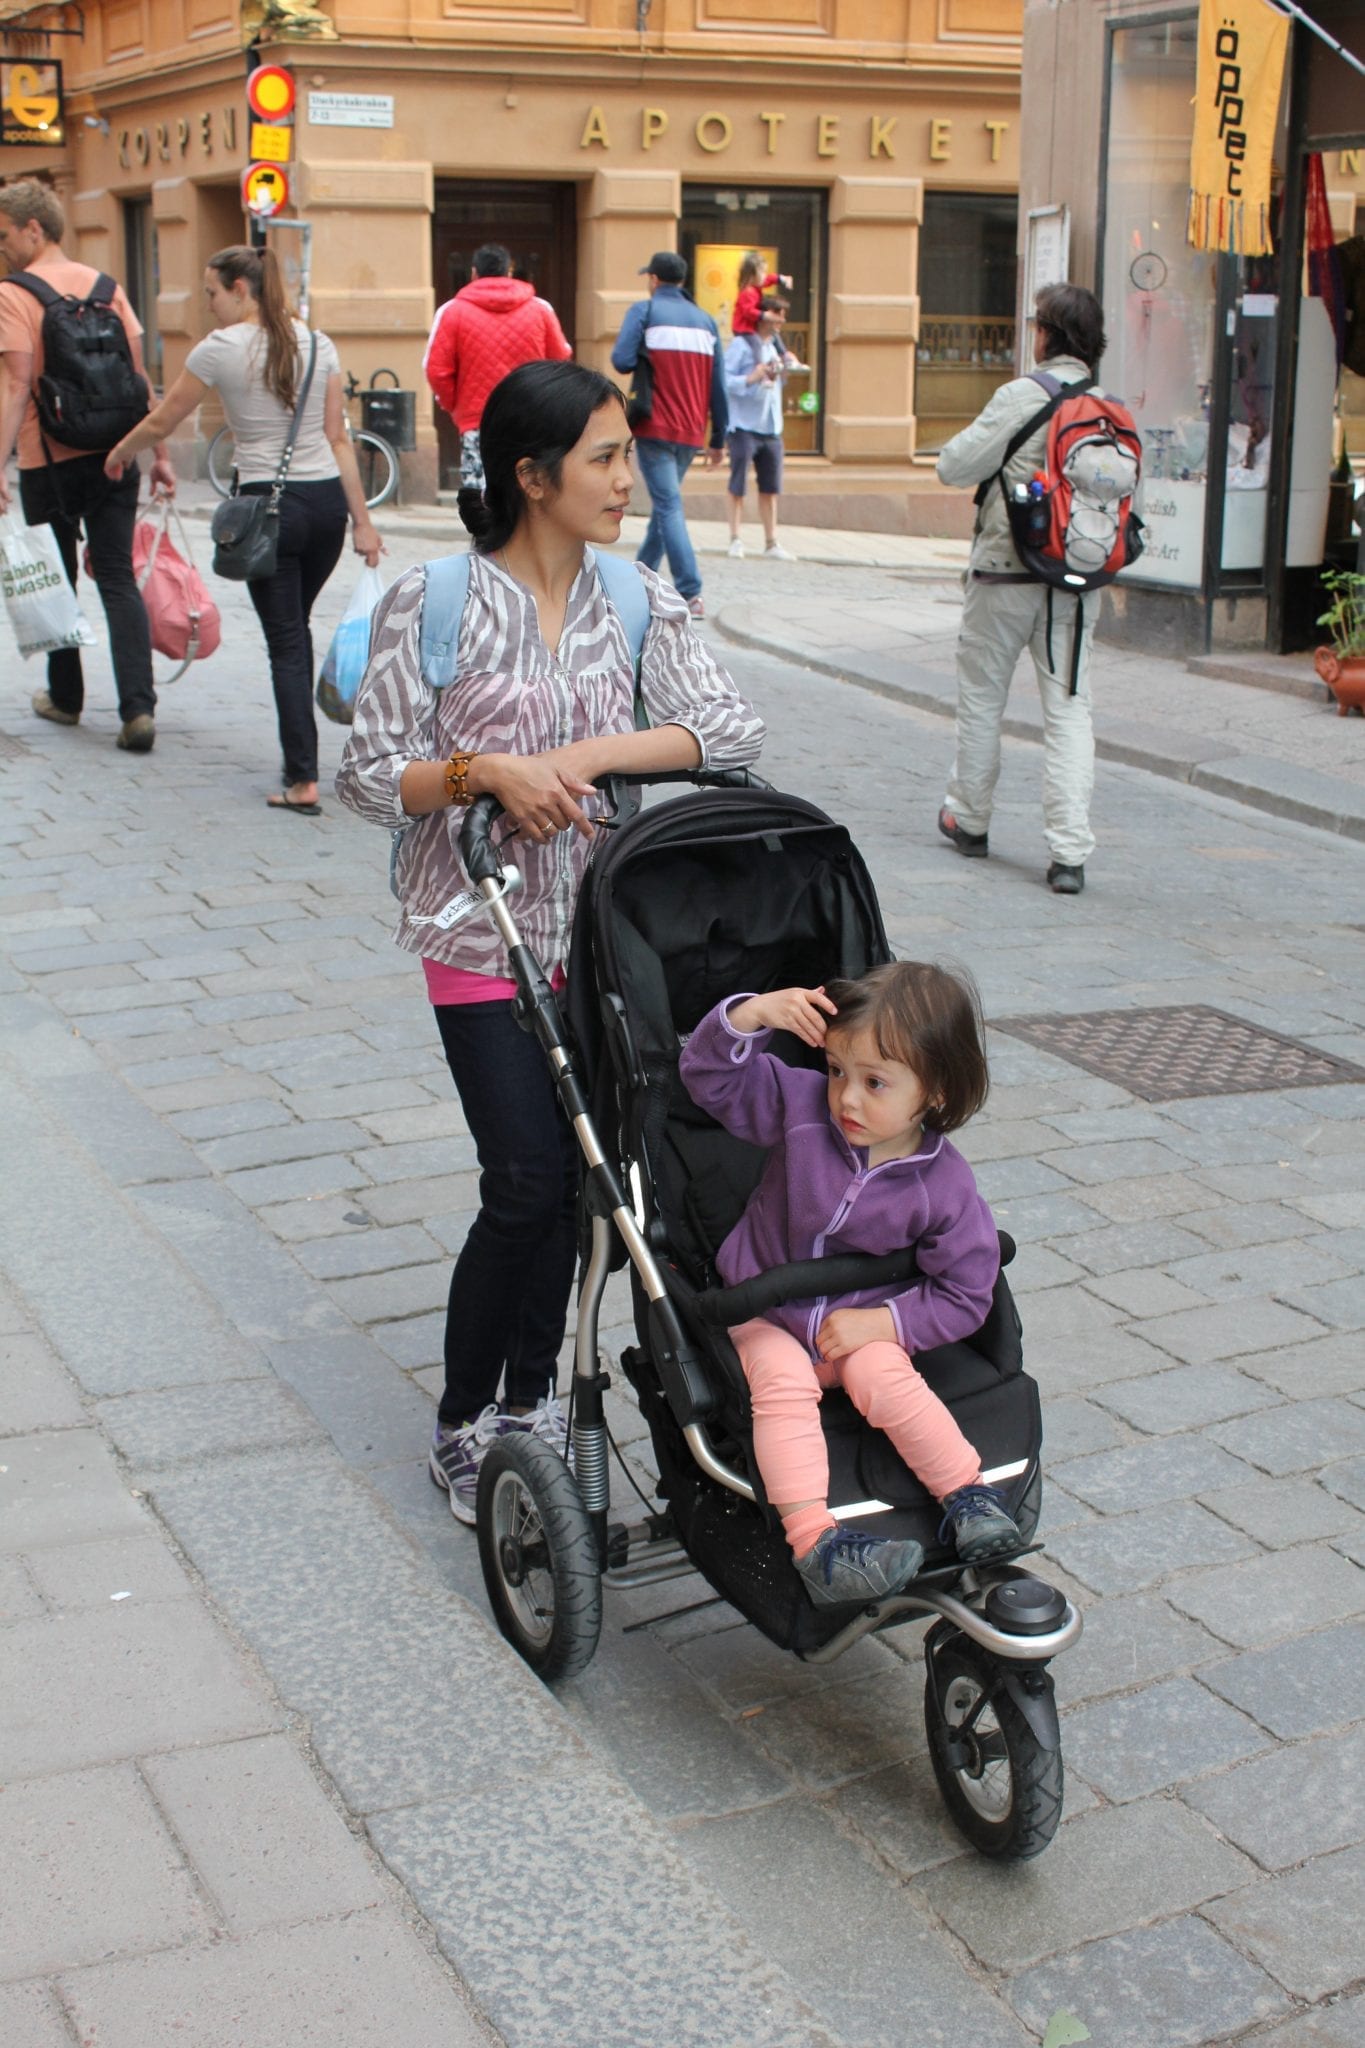 image of a child being pushed in a stroller